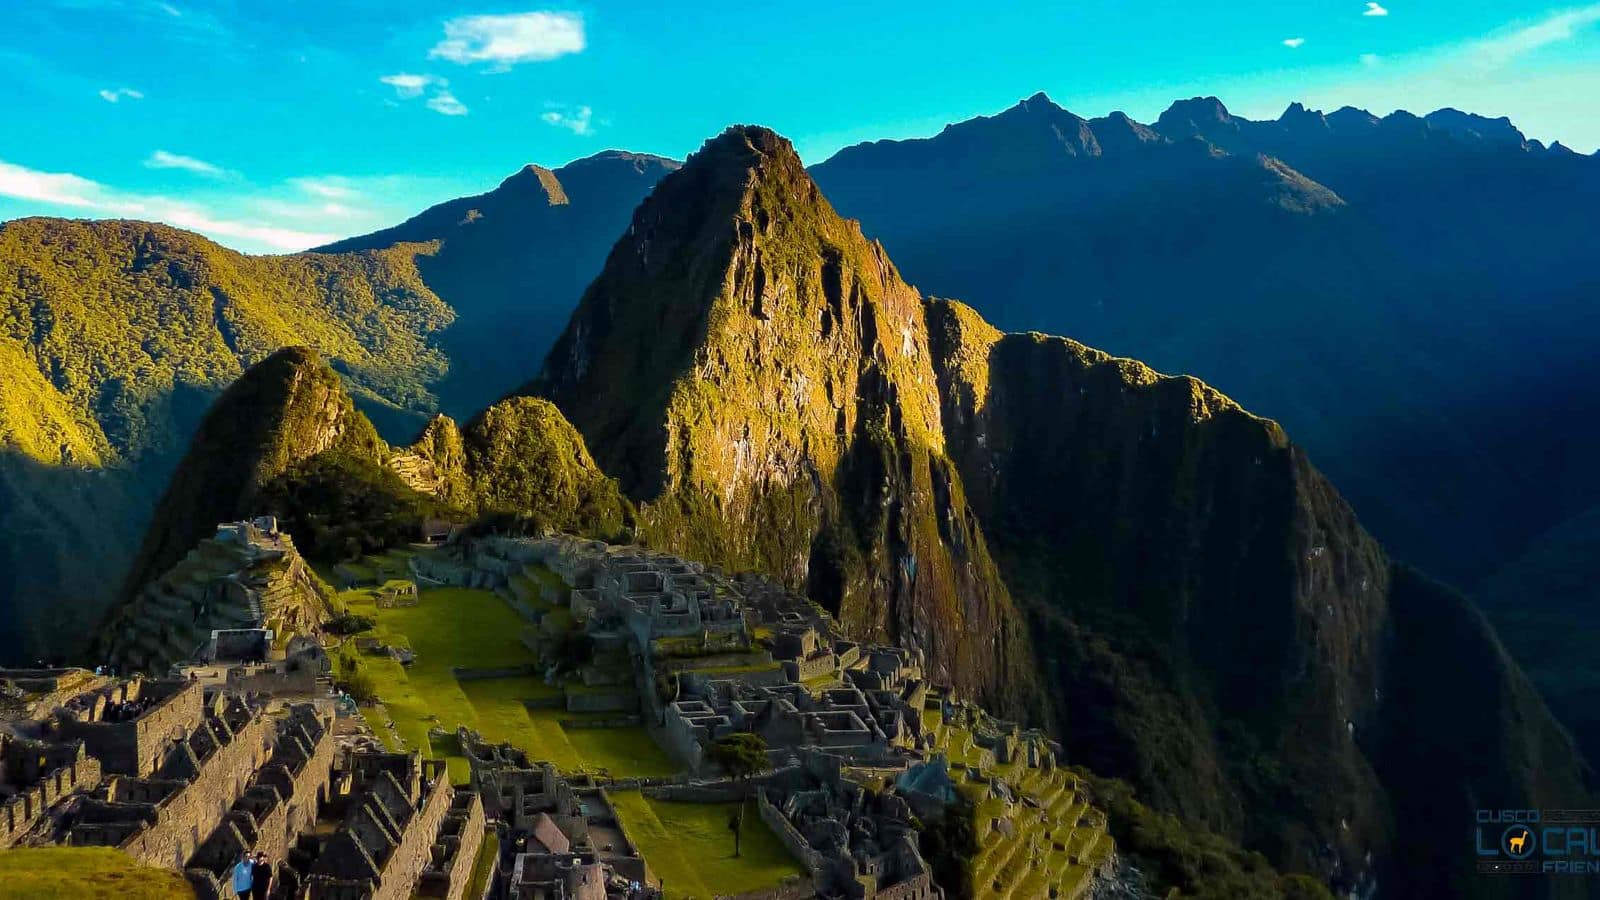 Uncover the mysteries of Machu Picchu, Peru: A things-to-do guide